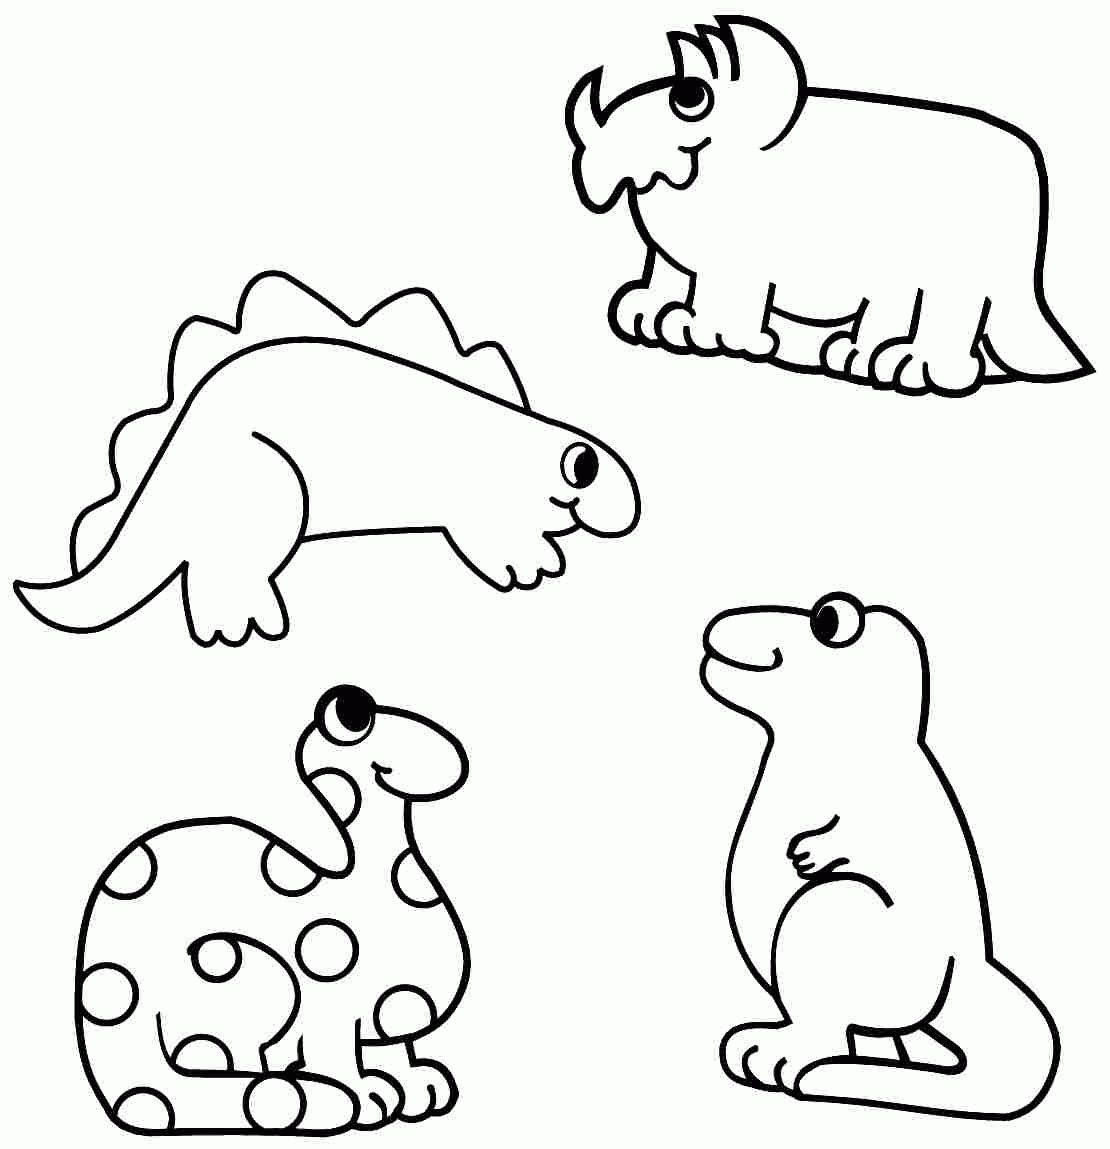 Dinosaur Coloring Pages For Toddlers - Coloring Home